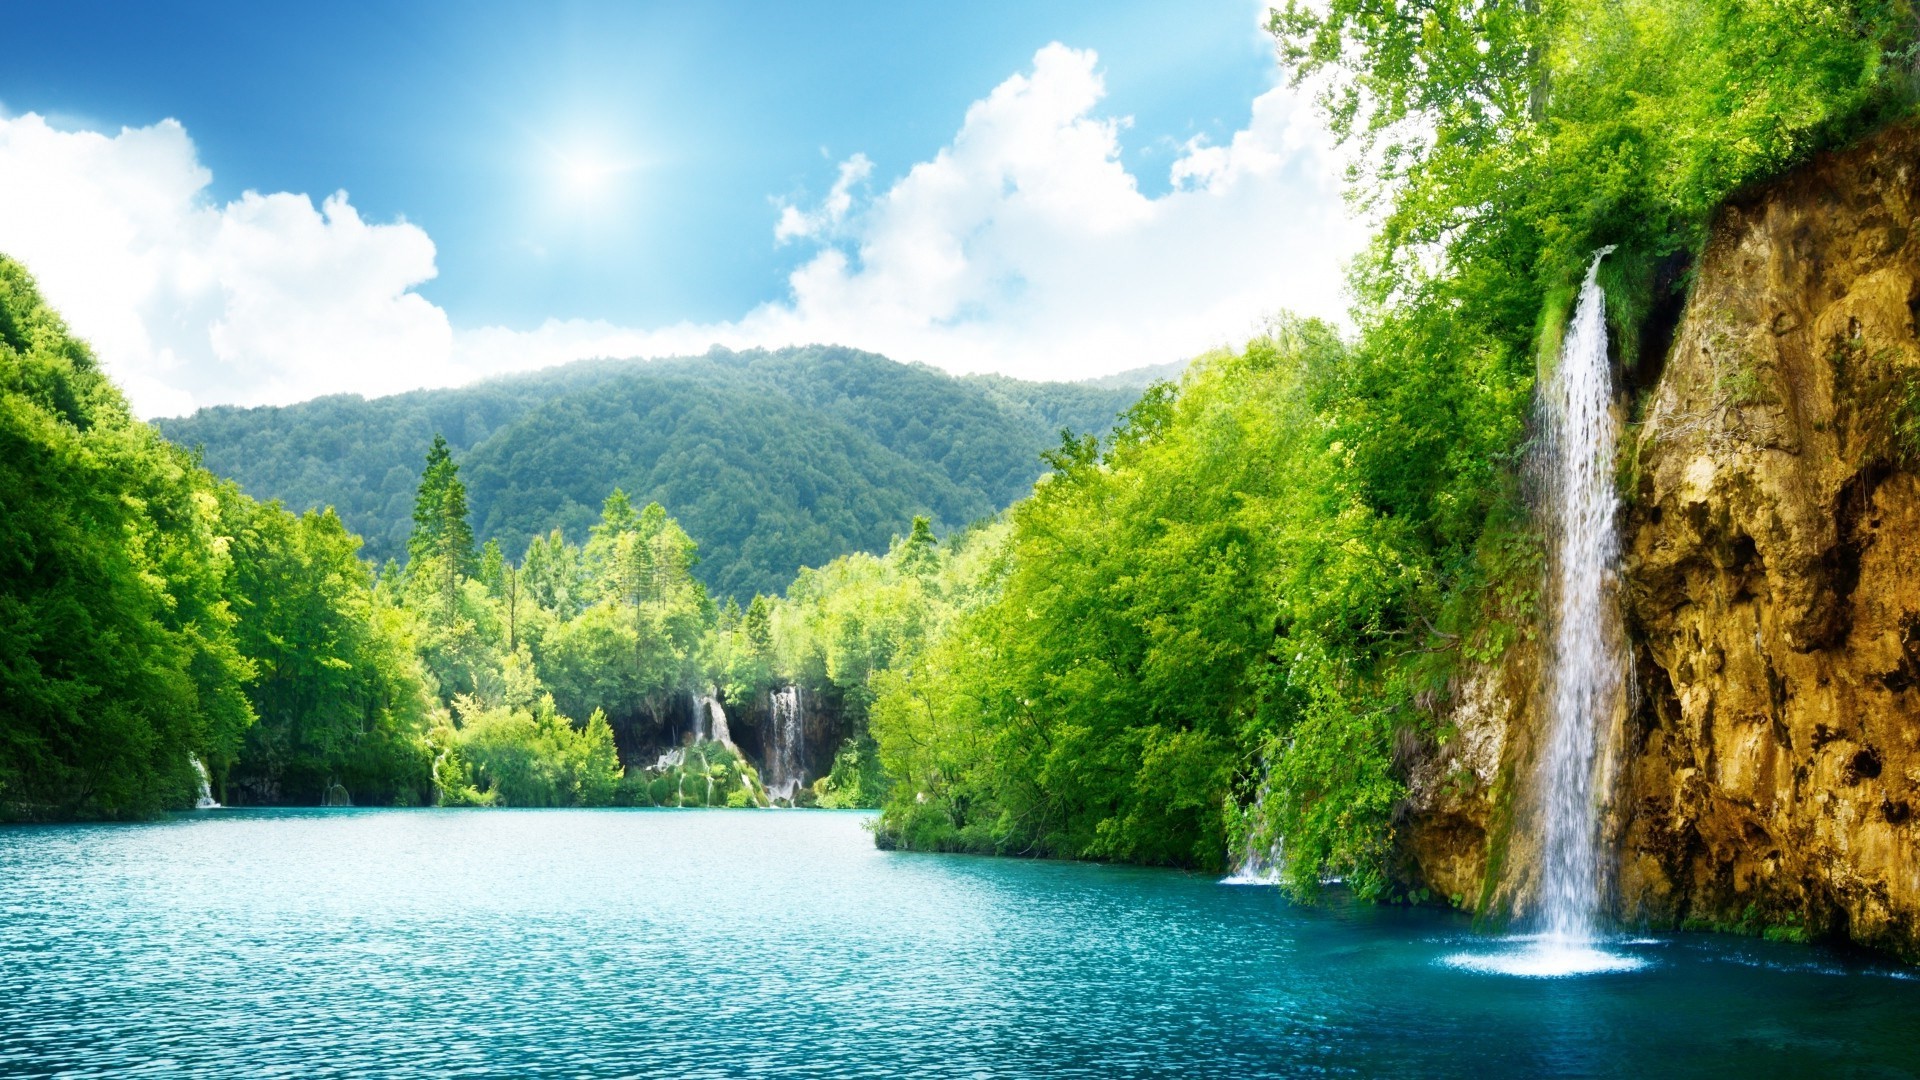 nature wallpaper 1920x1080,water resources,natural landscape,nature,body of water,water